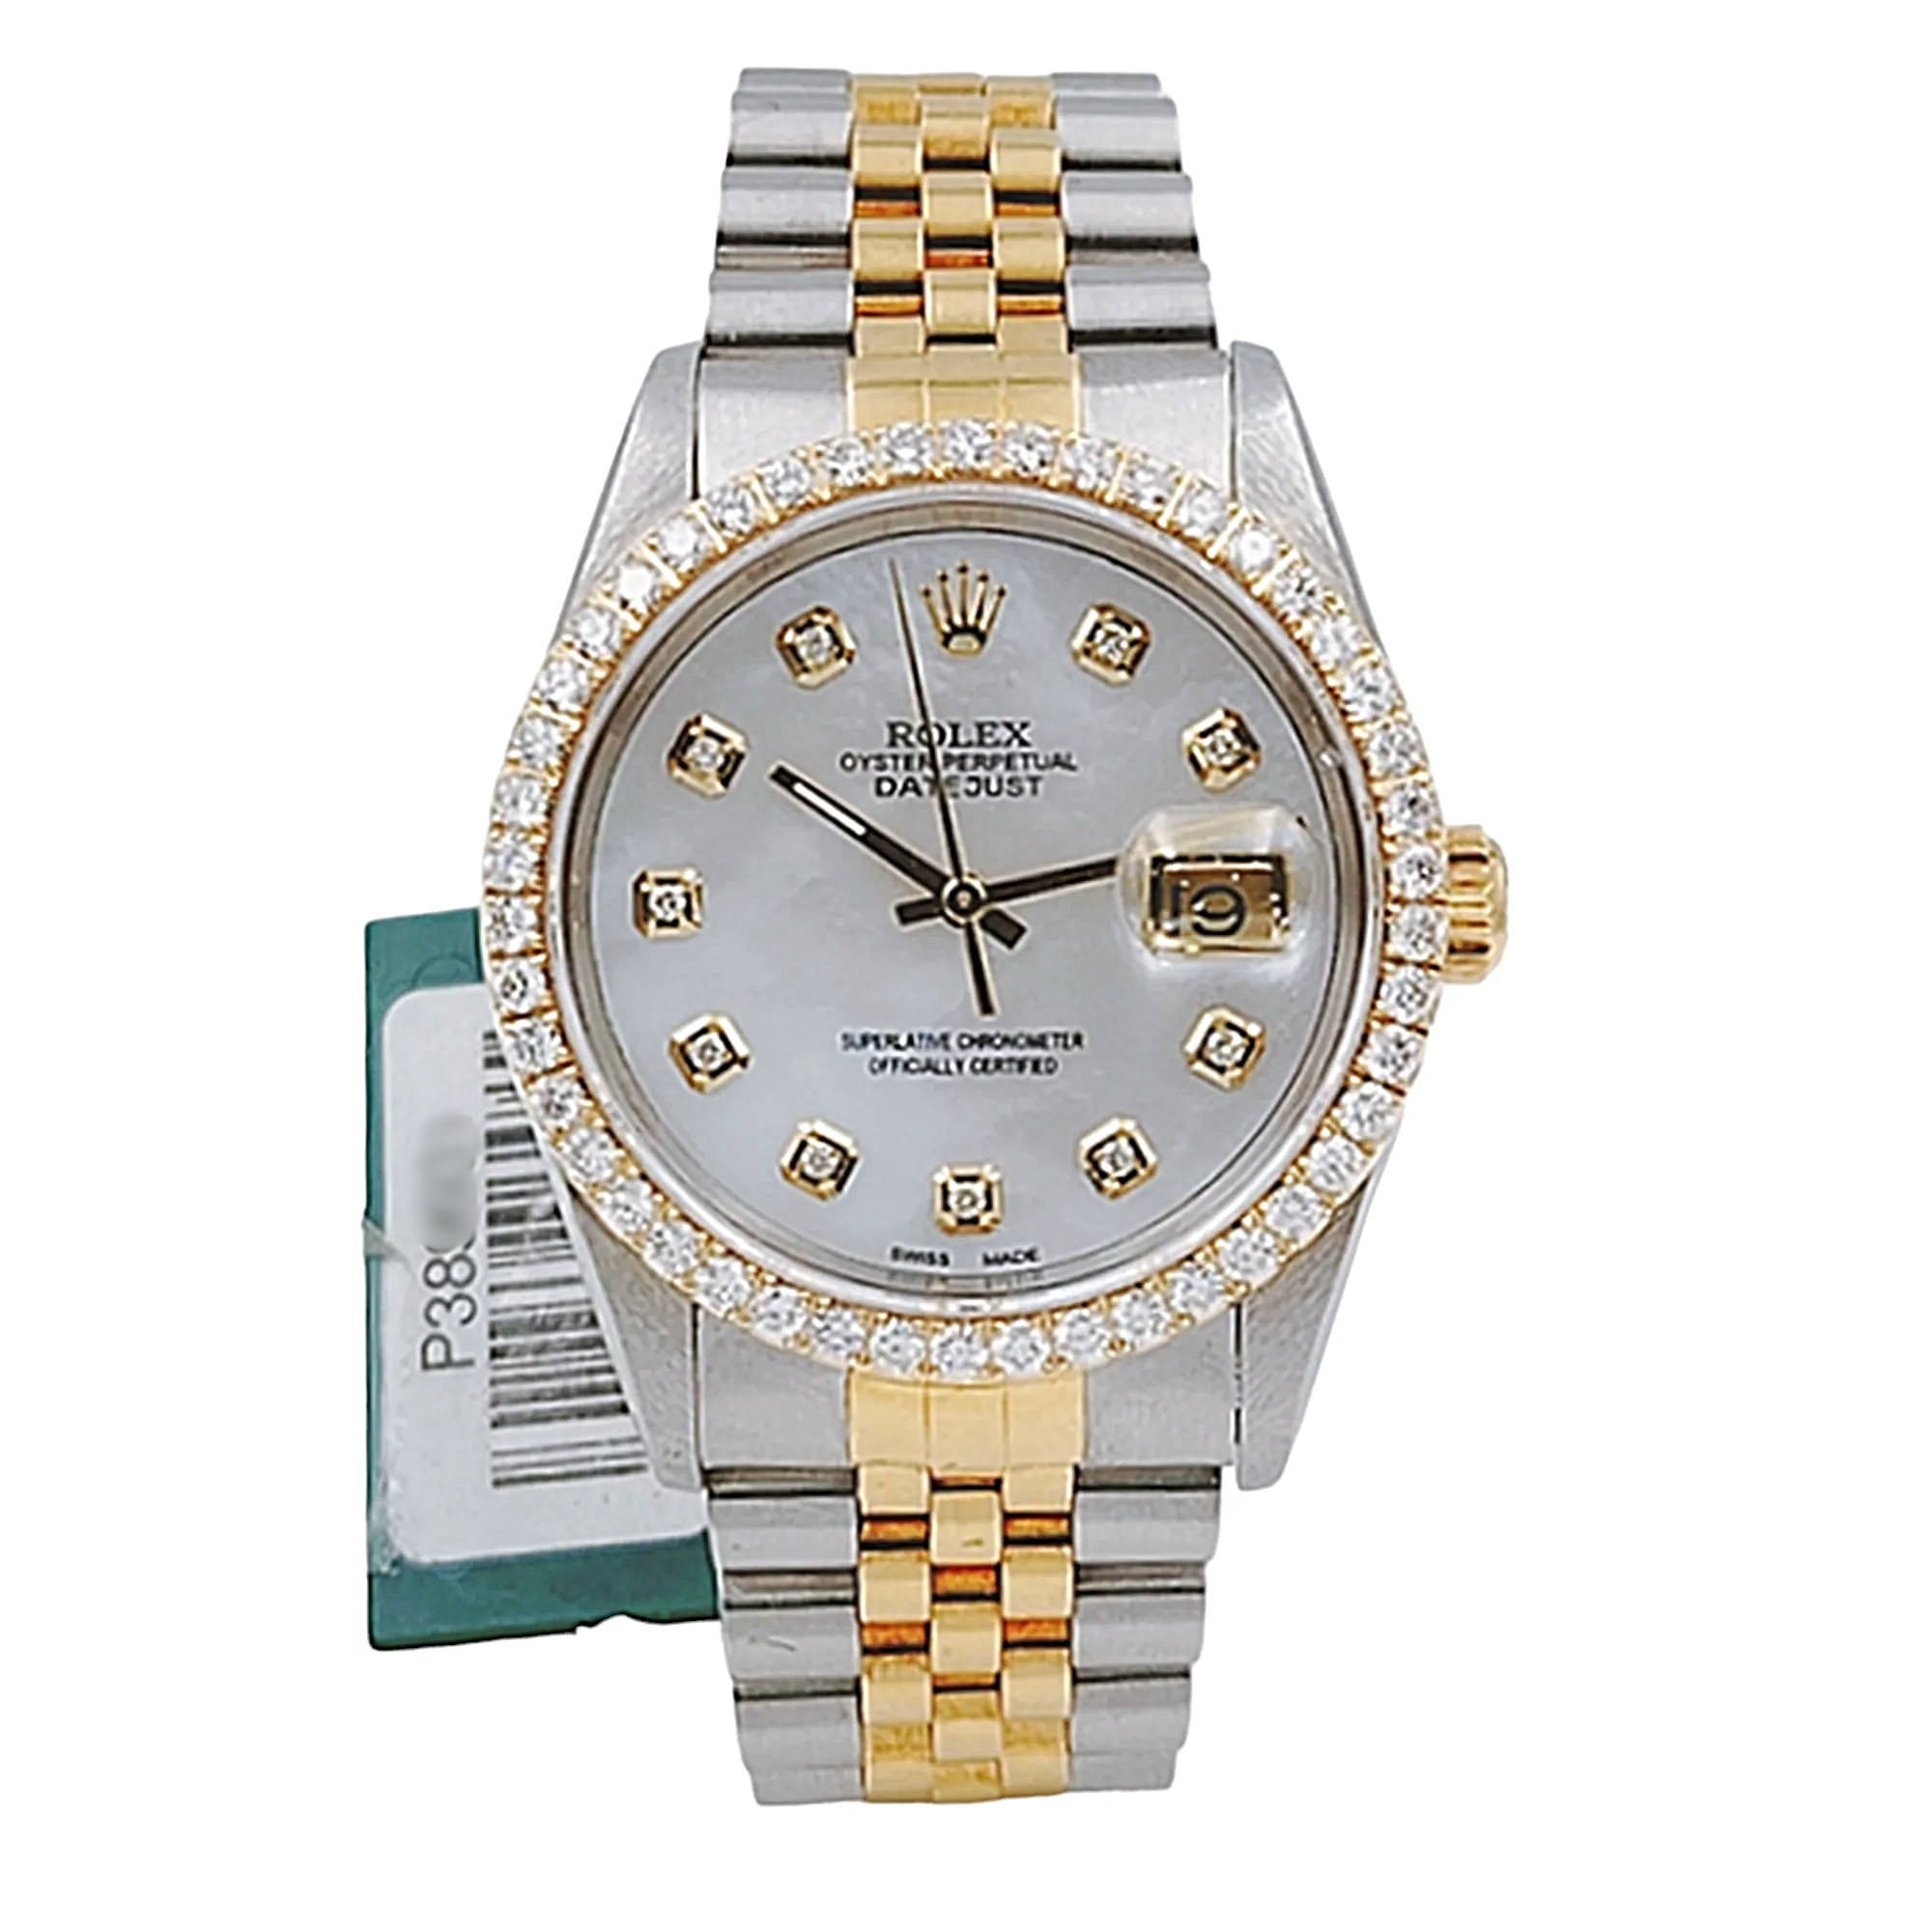 Men's Rolex 36mm DateJust 18K Gold / Stainless Steel Two Tone Watch with Mother of Pearl Diamond Dial and Diamond Bezel. (Pre-Owned 16233)